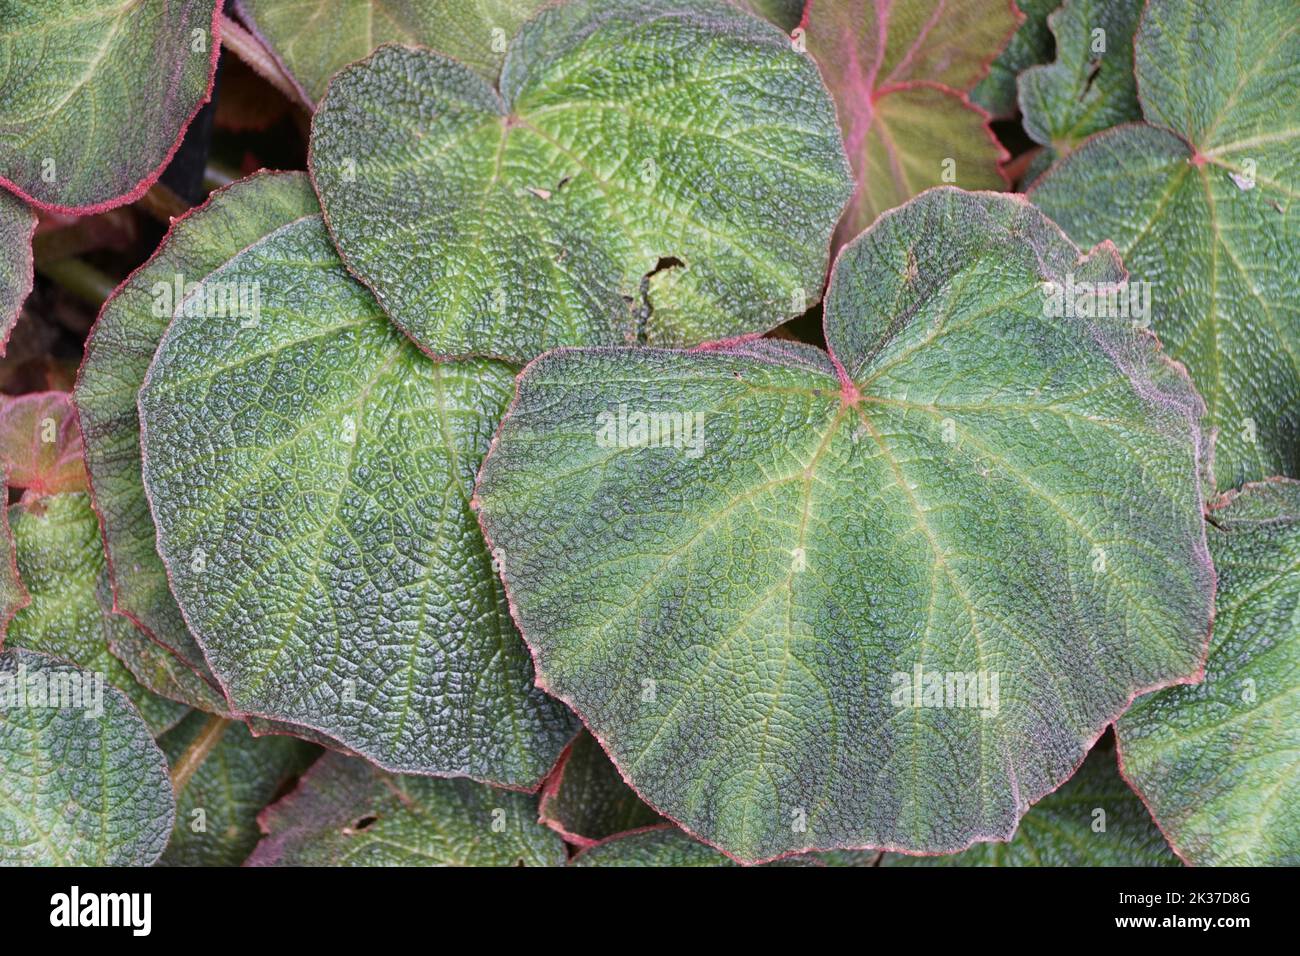 The green leaves of Begonia Art Hodes, a tropical plant Stock Photo